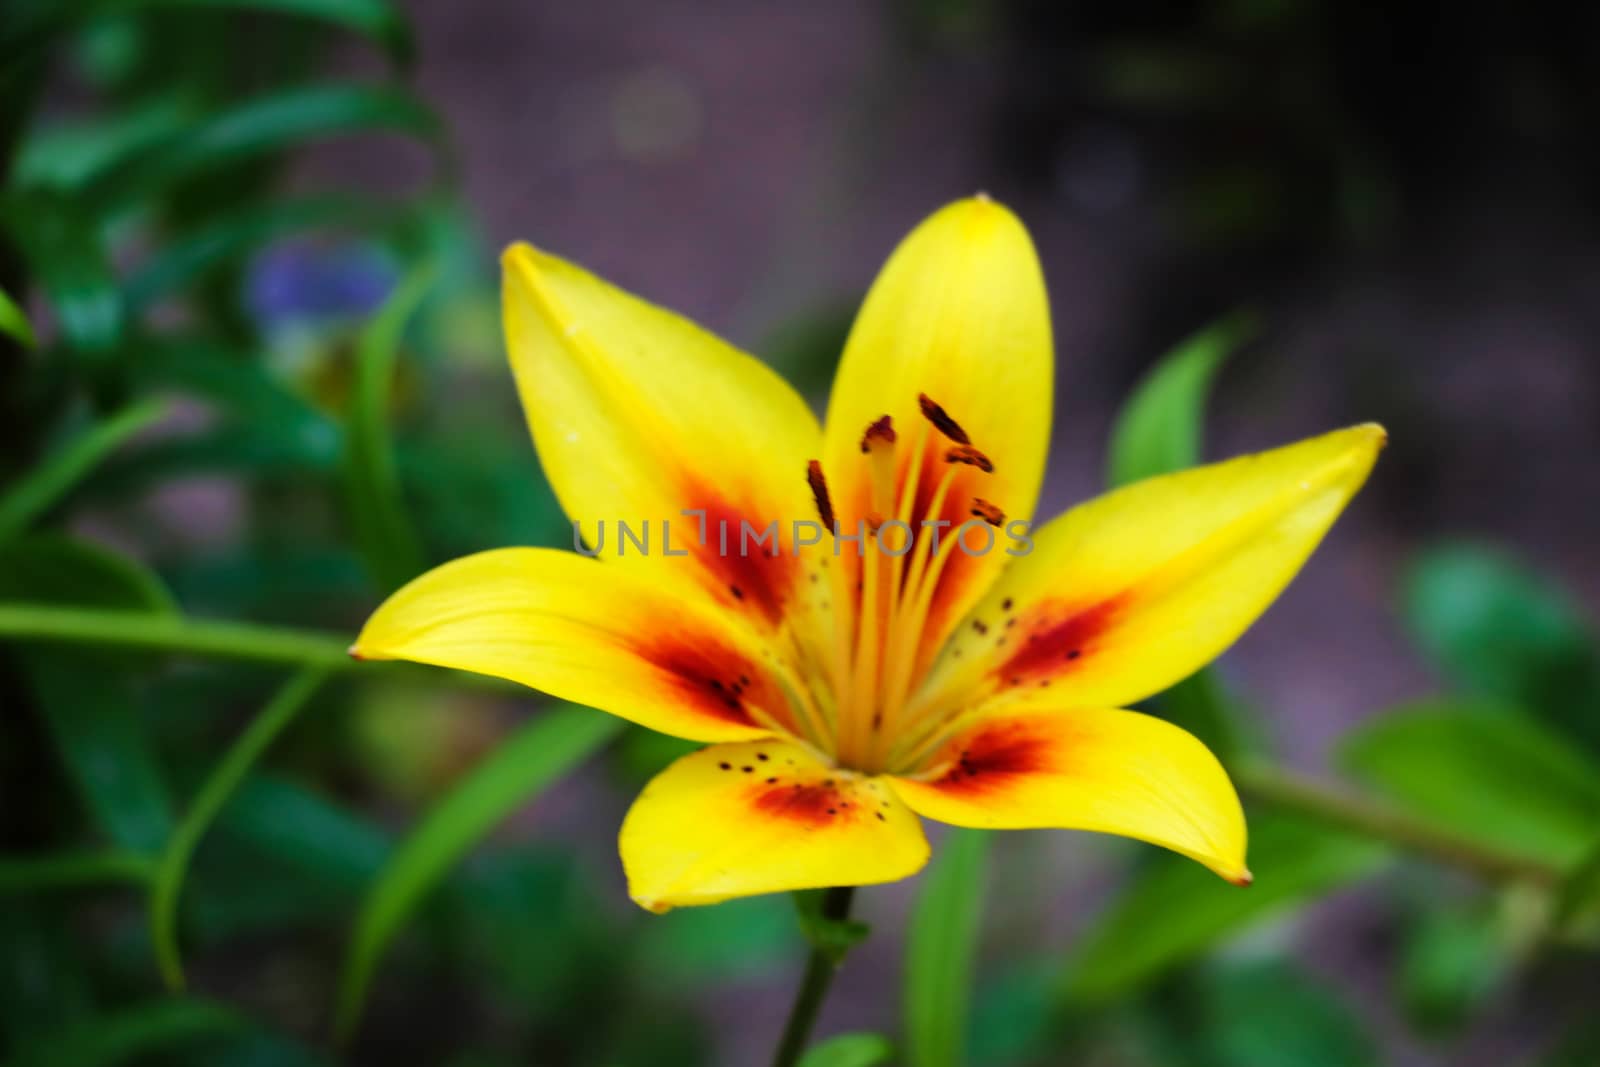 Summer flowers in nature. Yellow lilly close-up